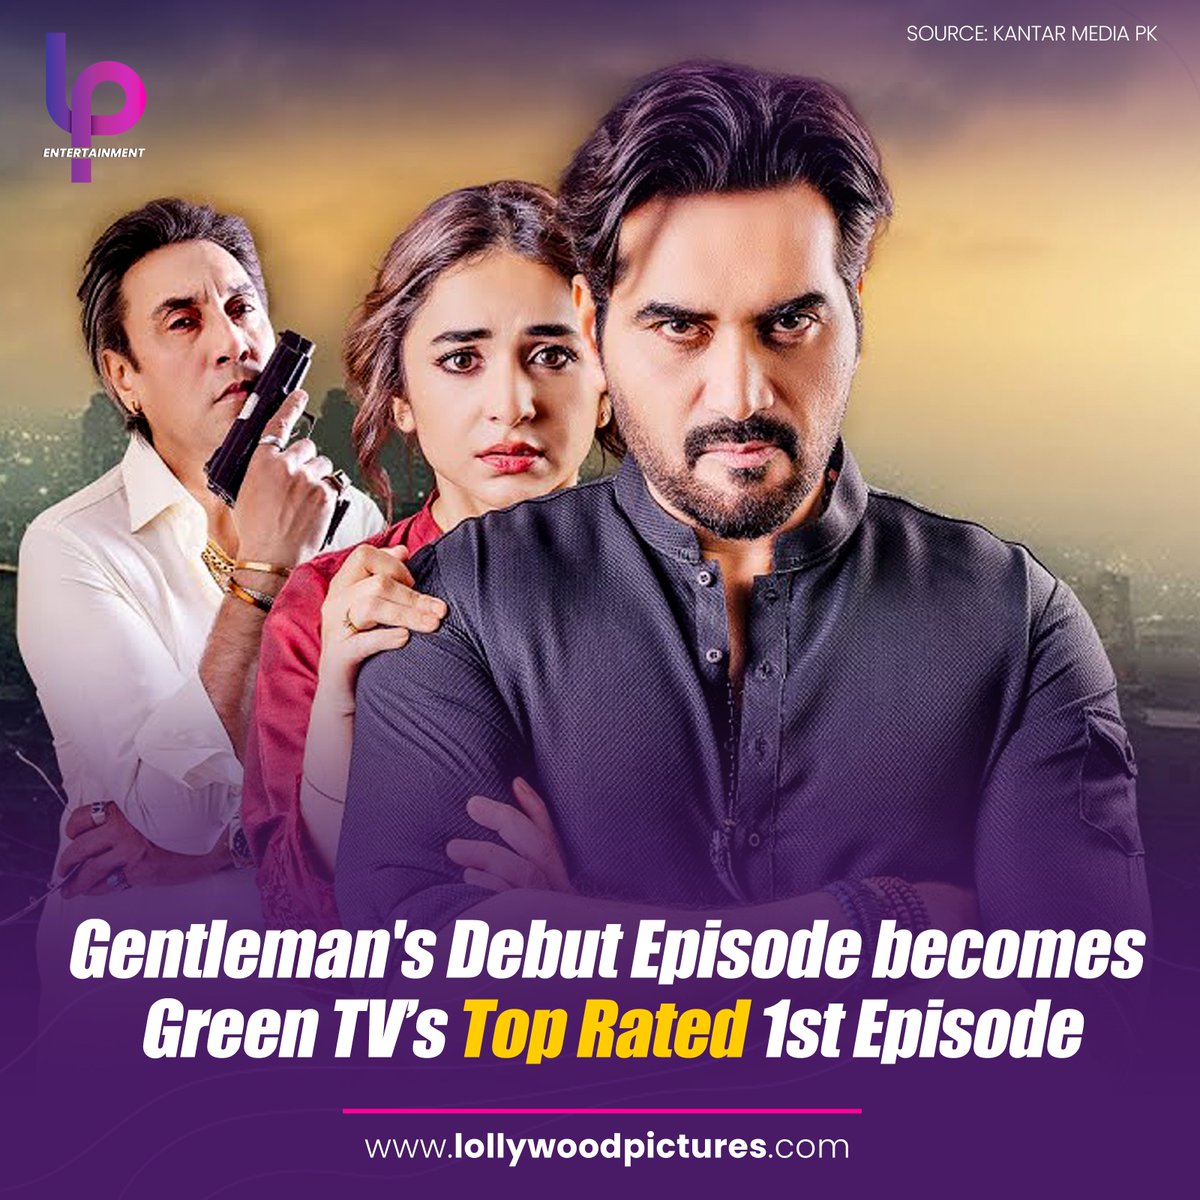 Green TV's new mega drama serial Gentleman's debut episode has become the highest rated 1st episode in Green TV history. No other drama has achieved the rating of more than 4.5 TRP except Gentleman. That's a massive start. 👏🔥 #HumayunSaeed #AdnanSiddiqui #YumnaZaidi